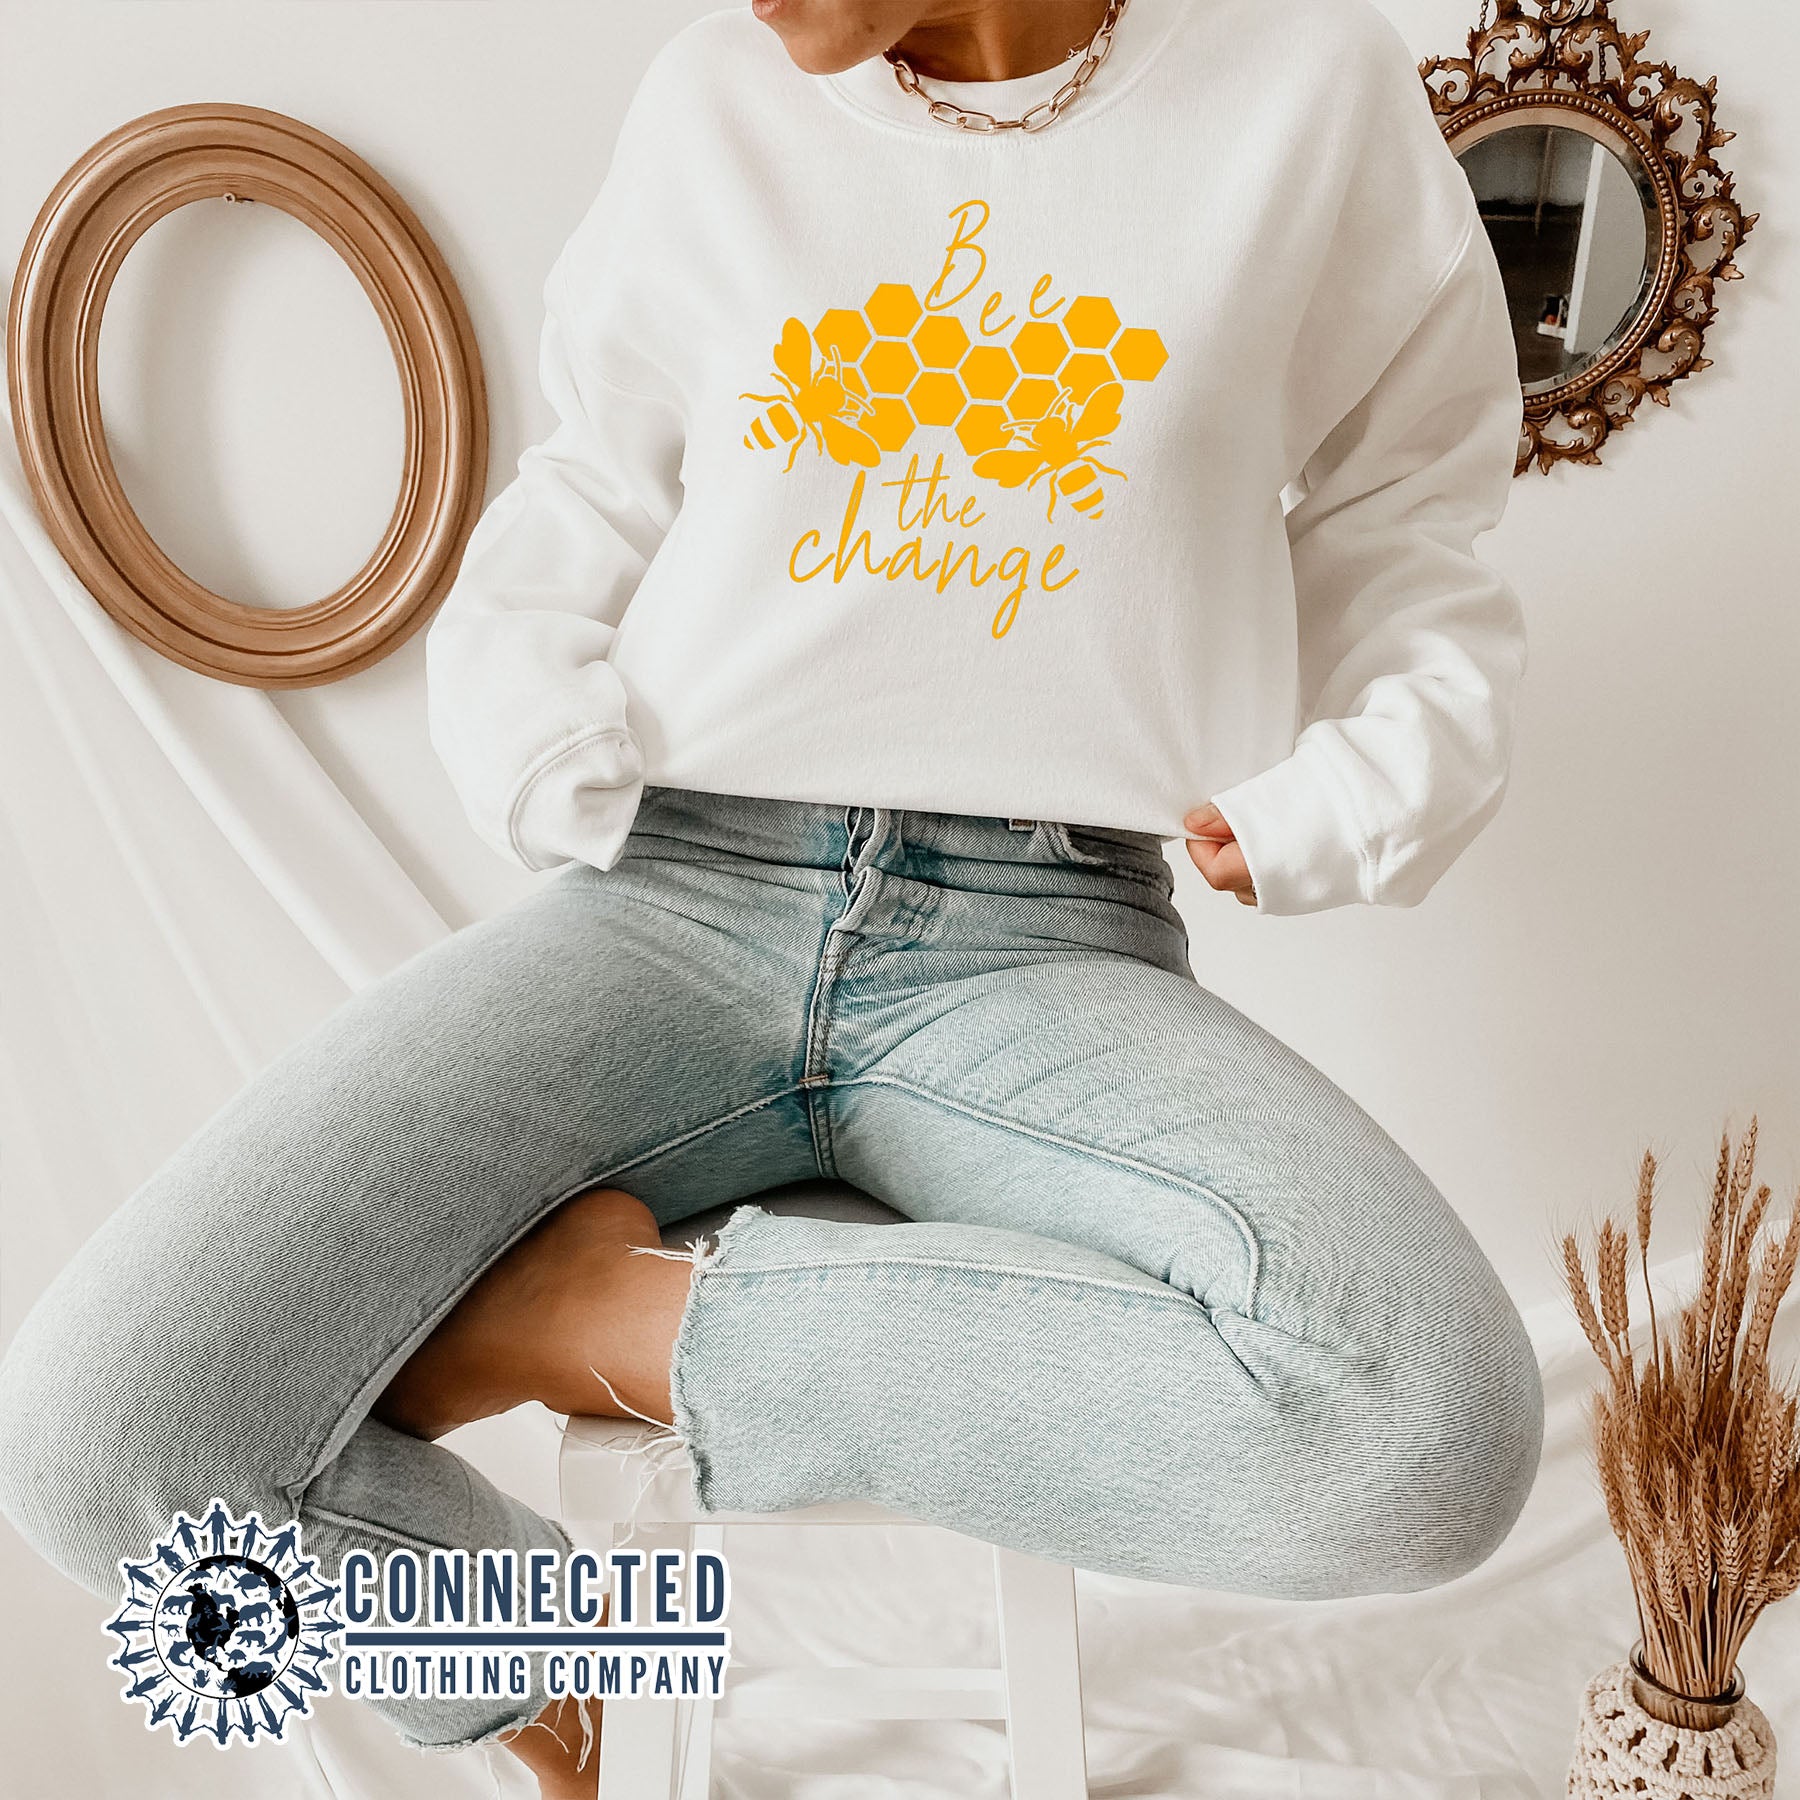 White Bee The Change Crewneck Sweatshirt - Connected Clothing Company - 10% of profits donated to the Honeybee Conservancy